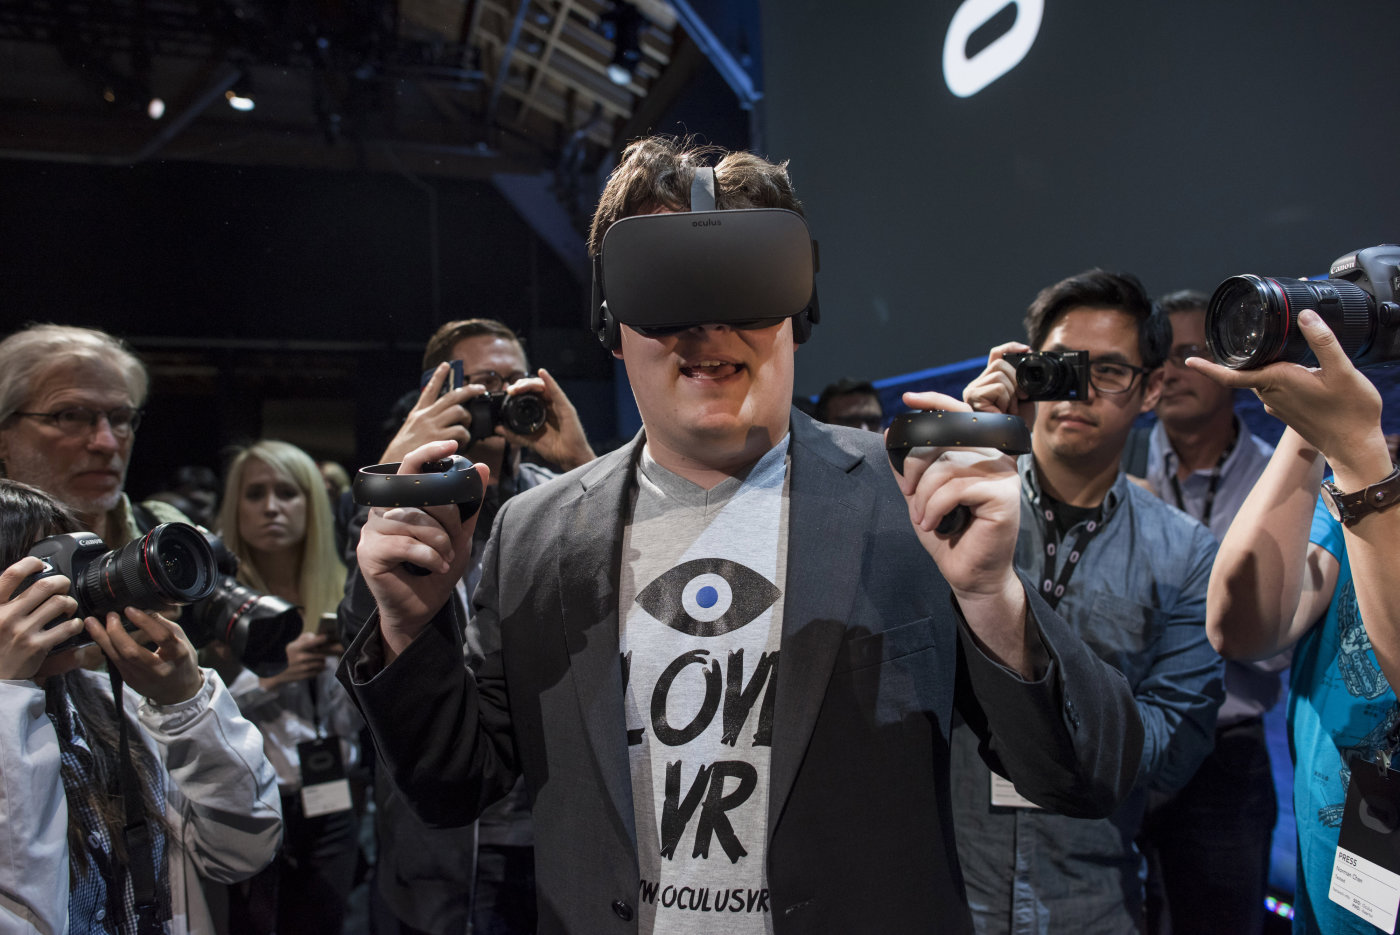 Palmer Luckey and the Oculus Rift